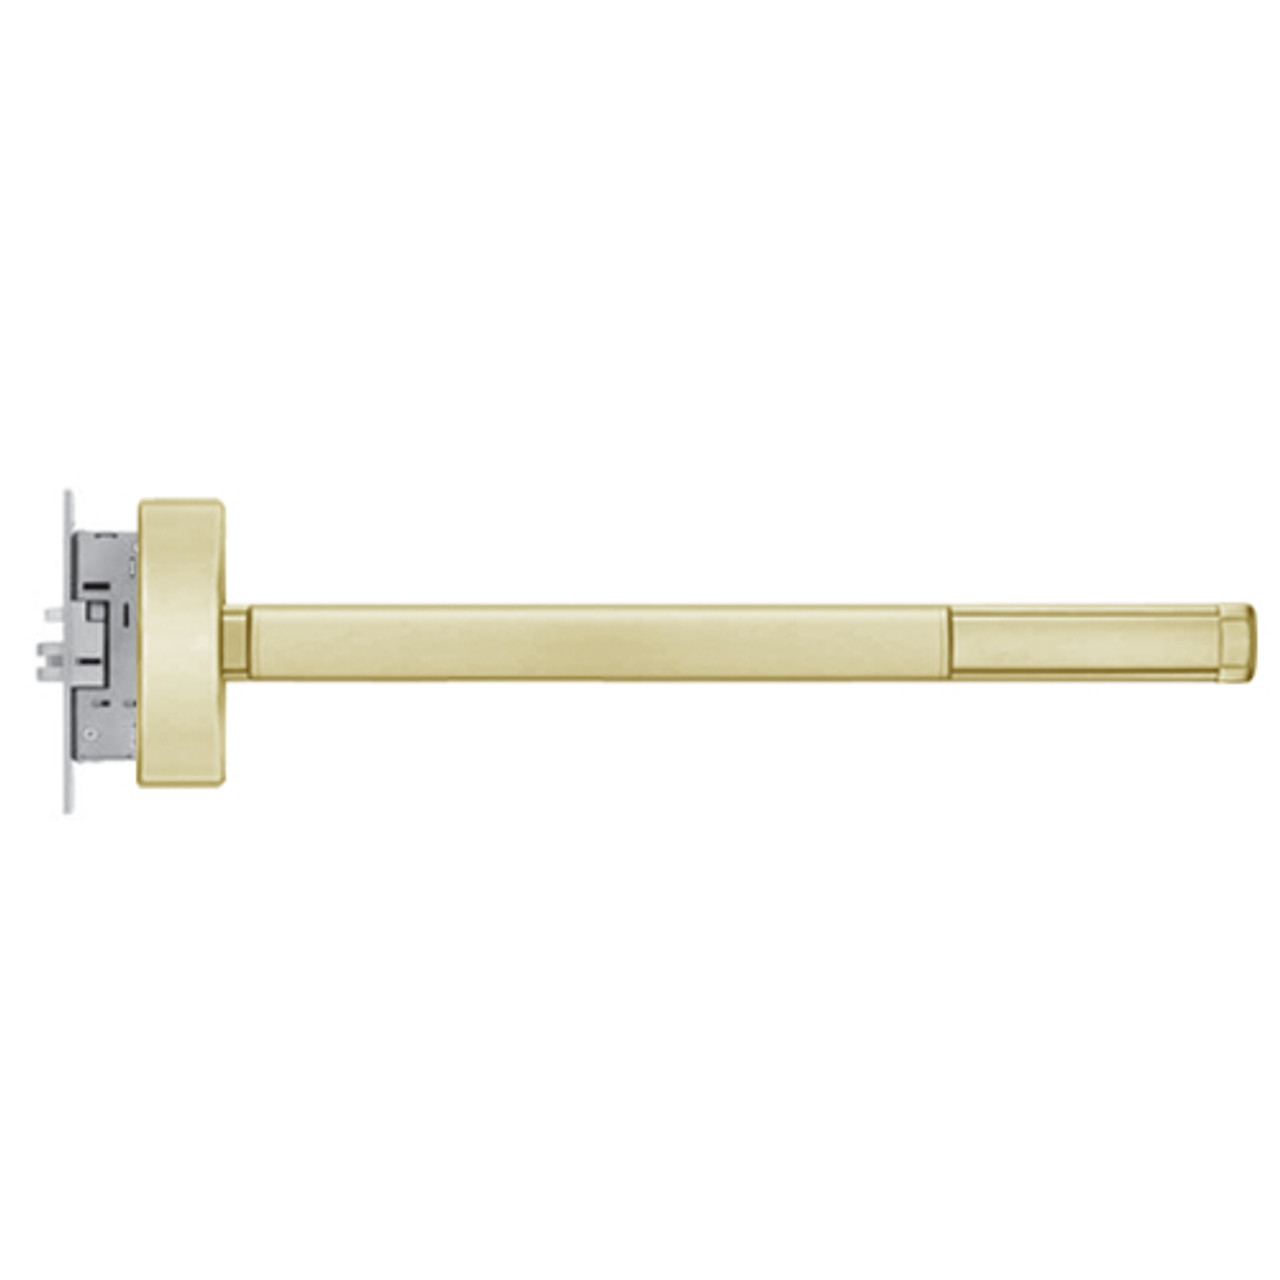 2303-LHR-606-48 PHI 2300 Series Non Fire Rated Apex Mortise Exit Device Prepped for Key Retracts Latchbolt in Satin Brass Finish